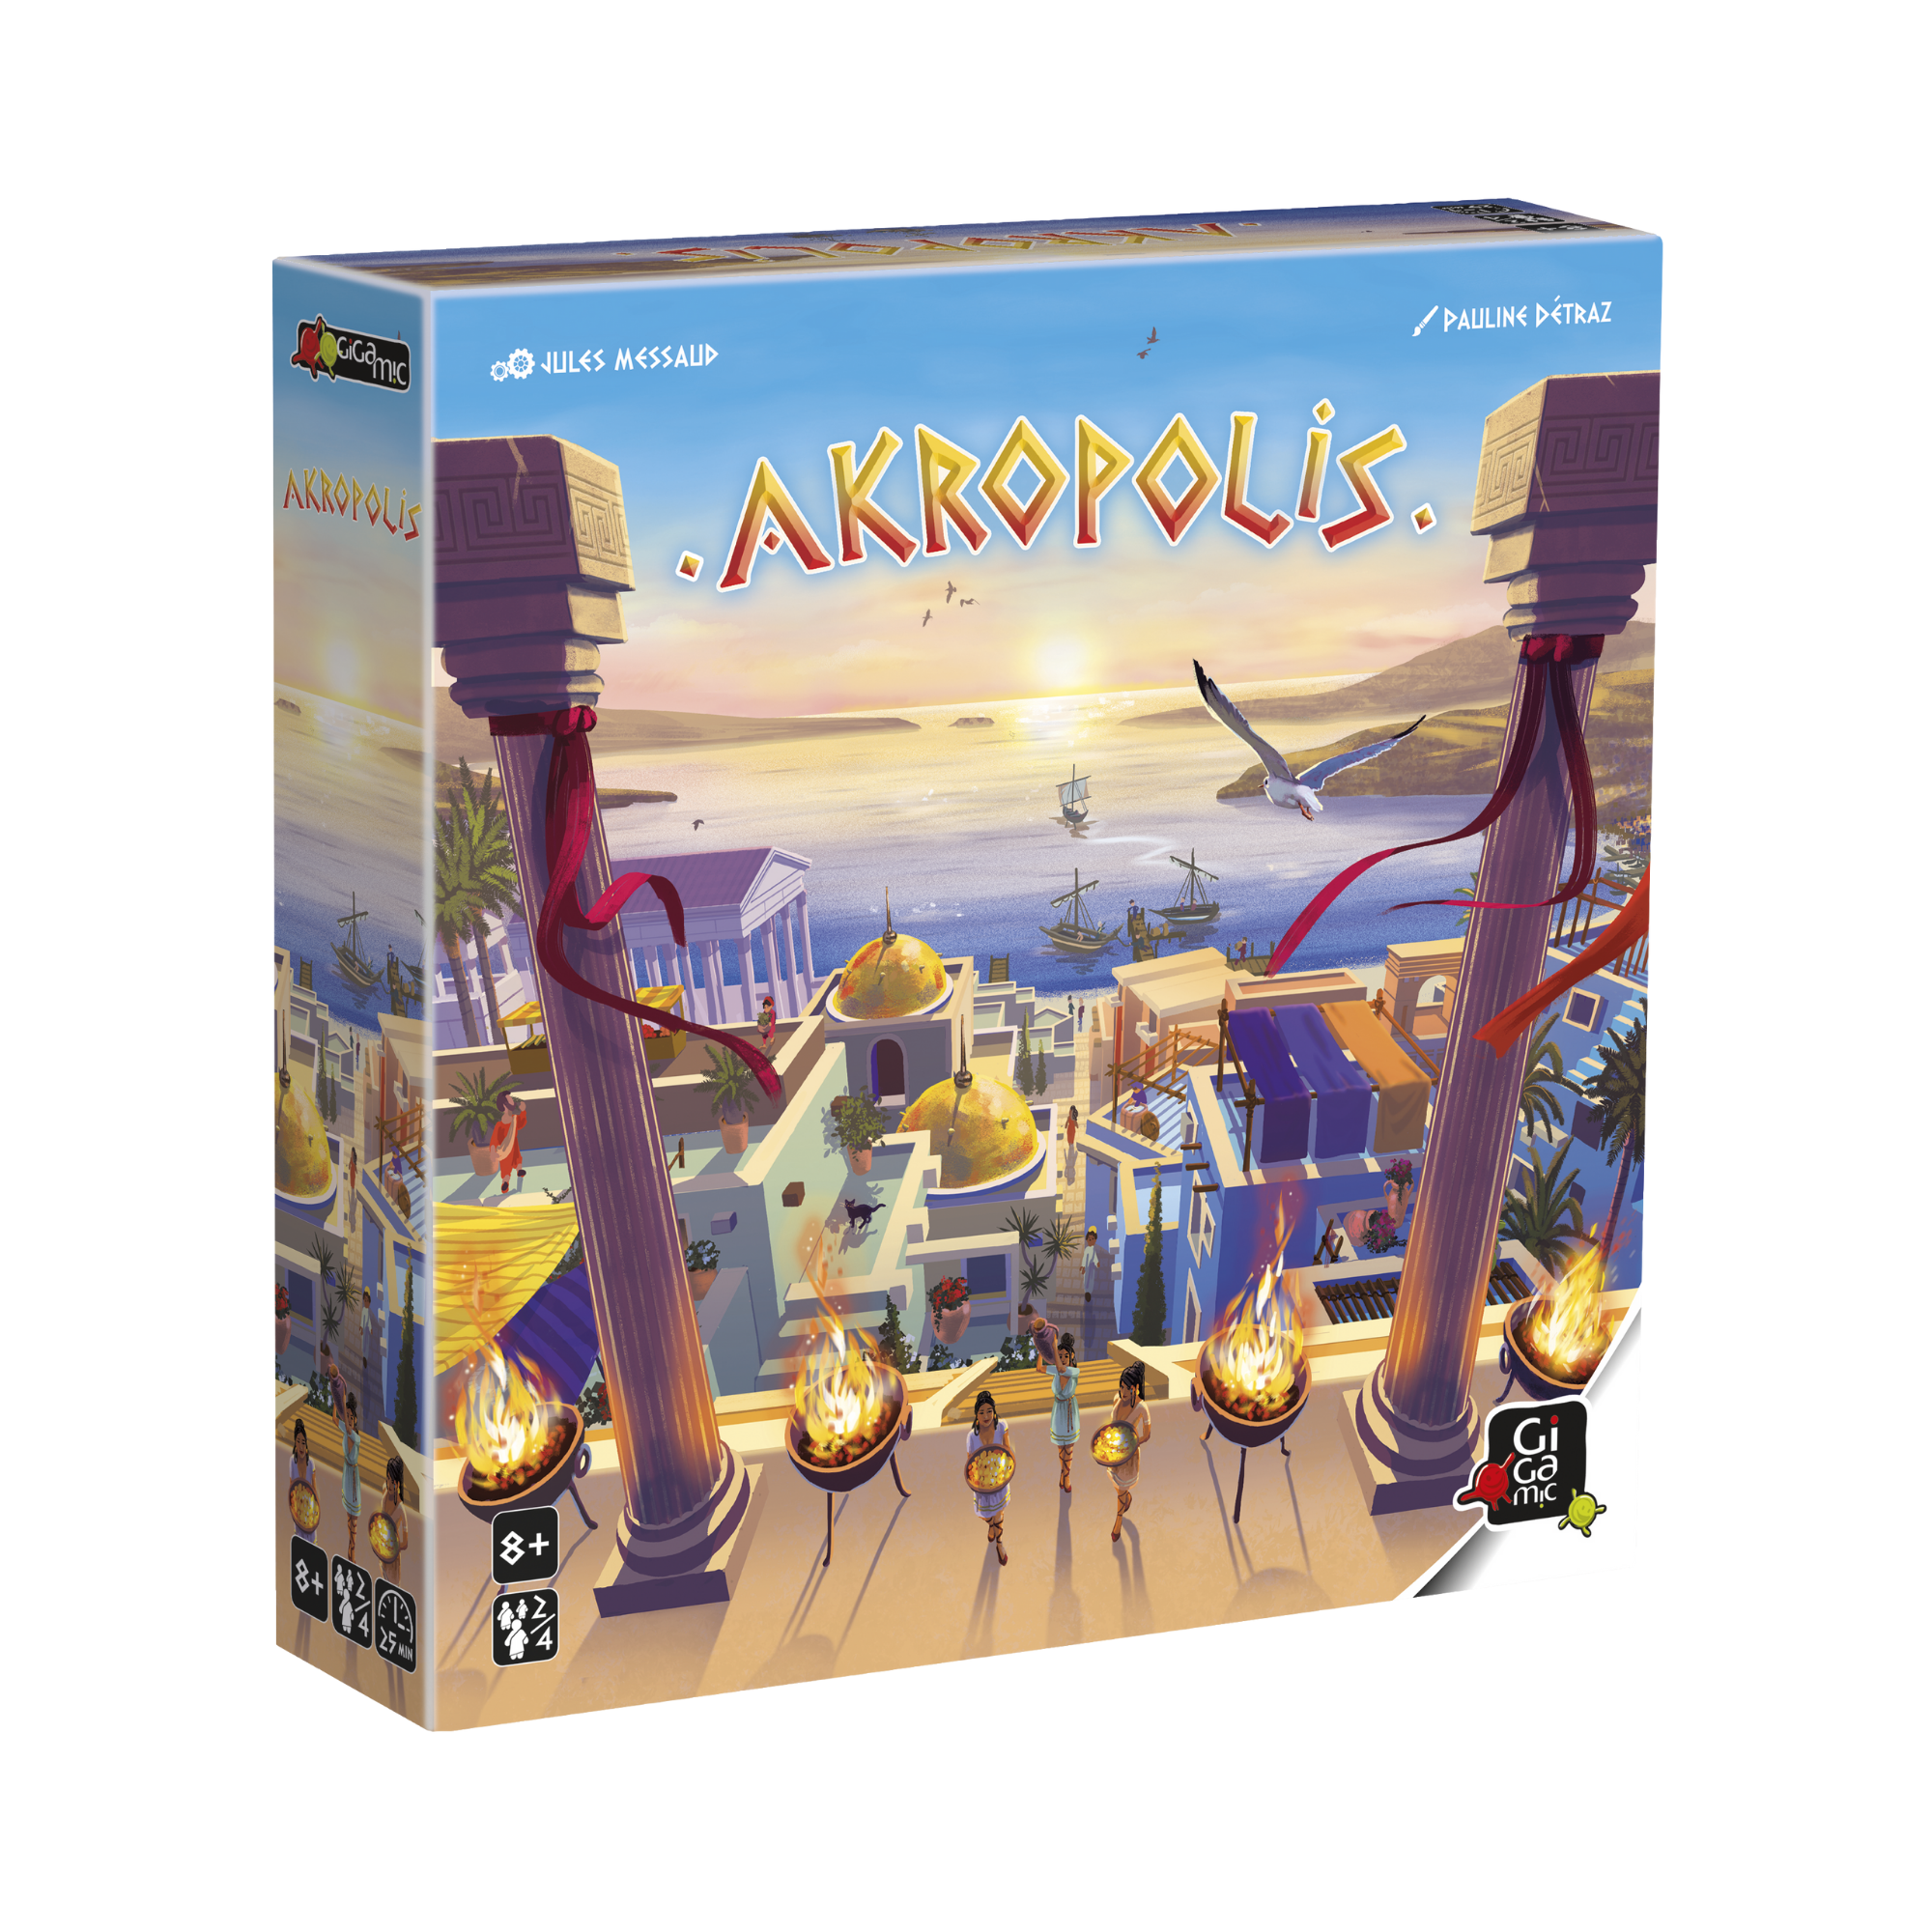 7 Wonders: Architects – Medals - best deal on board games 